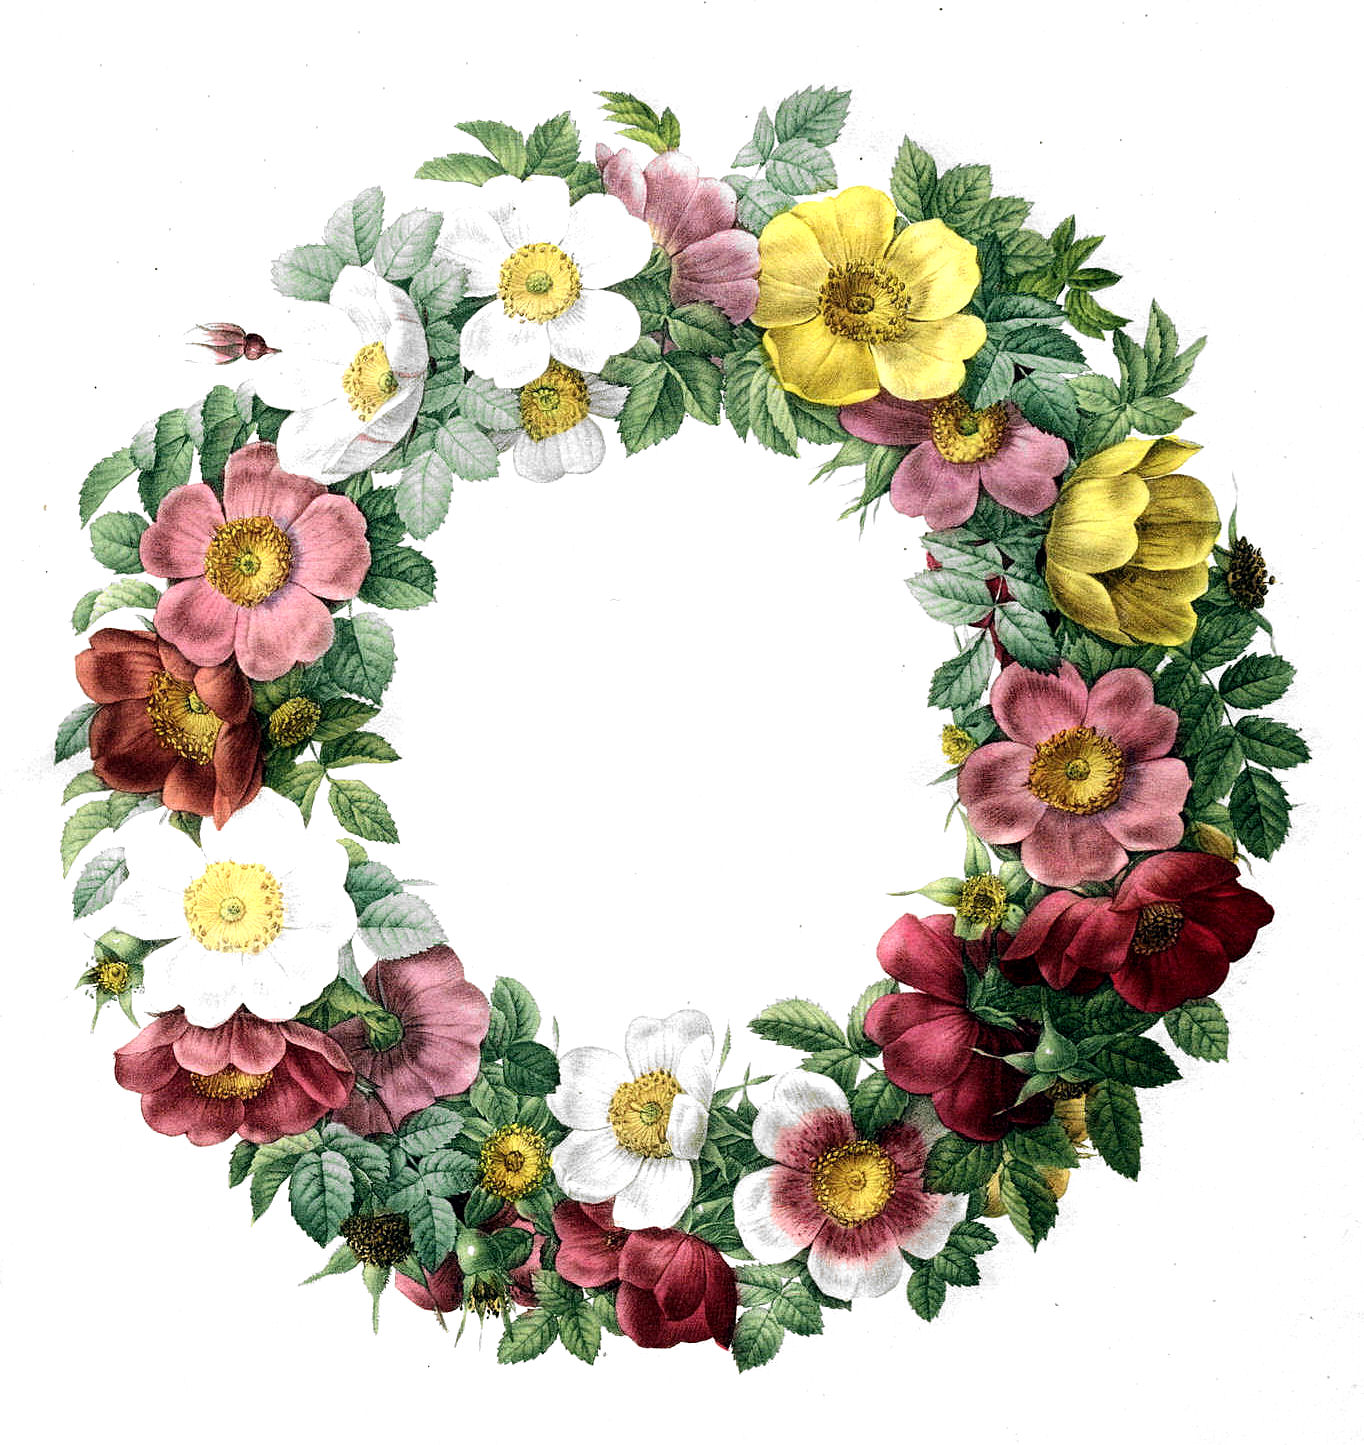 https://thegraphicsfairy.com/wp-content/uploads/2021/10/Floral-Wreath-Color-GraphicsFairy.jpg